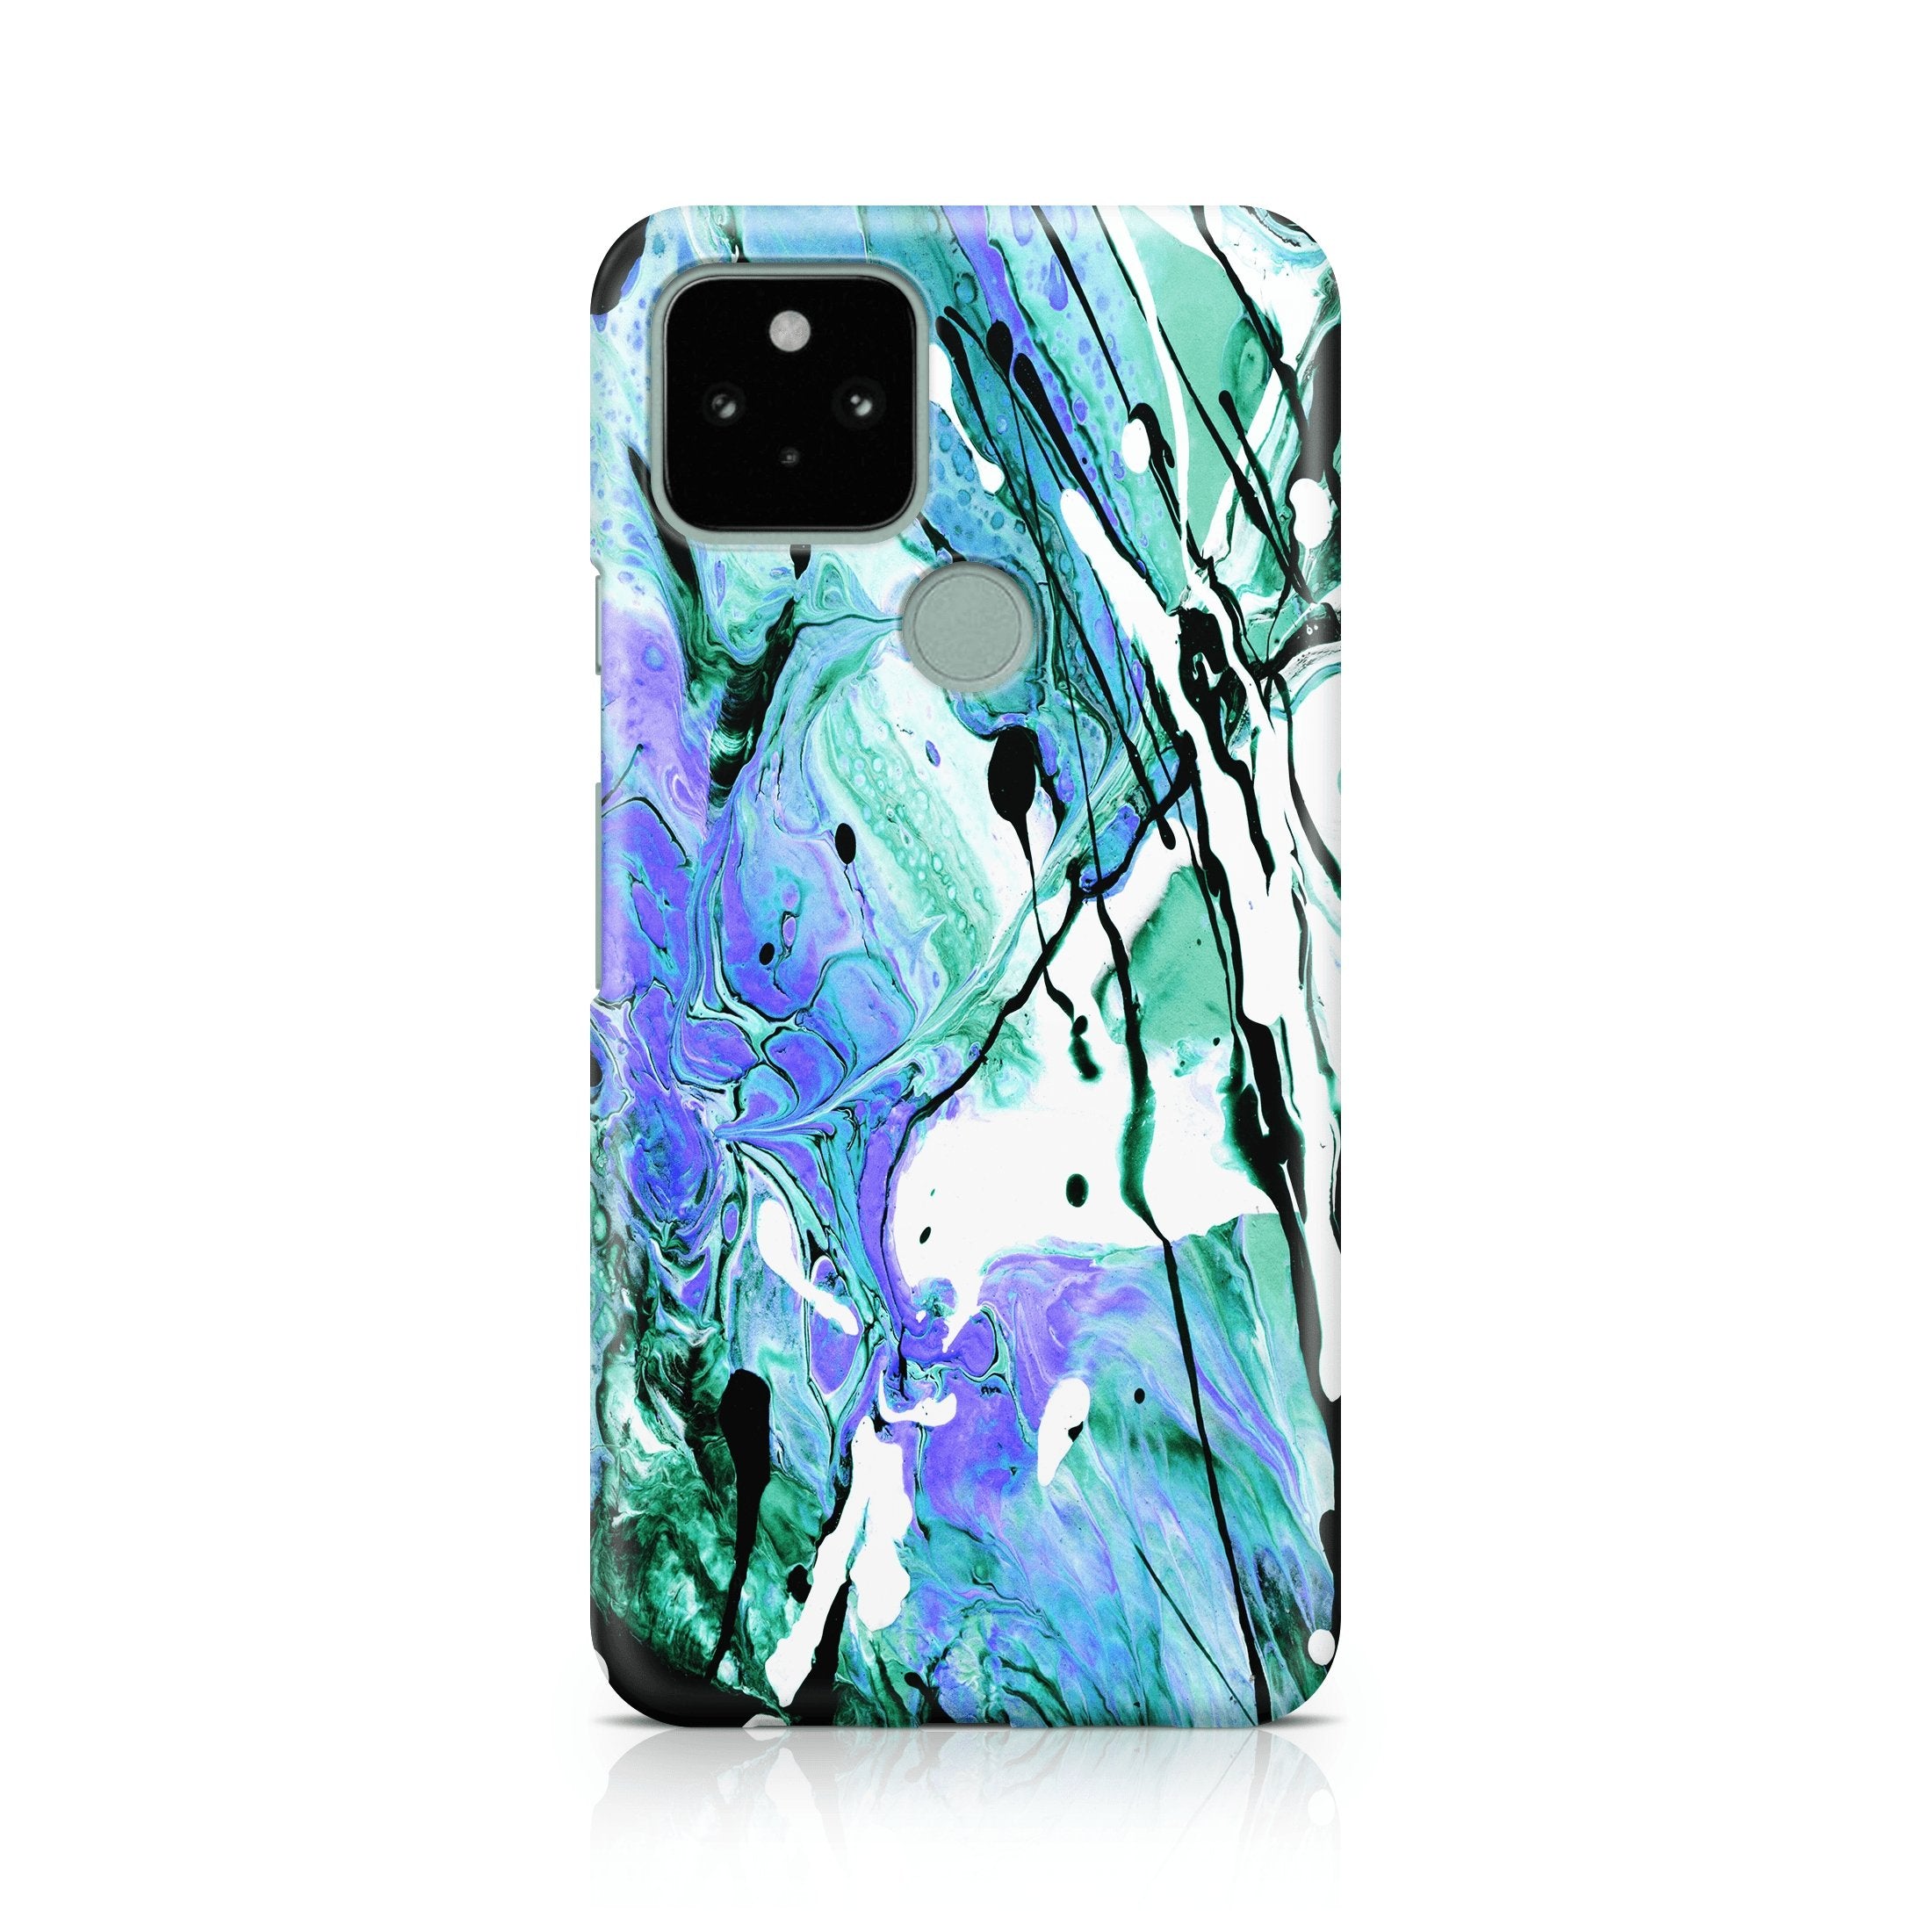 Blue Fluid Acrylic - Google phone case designs by CaseSwagger